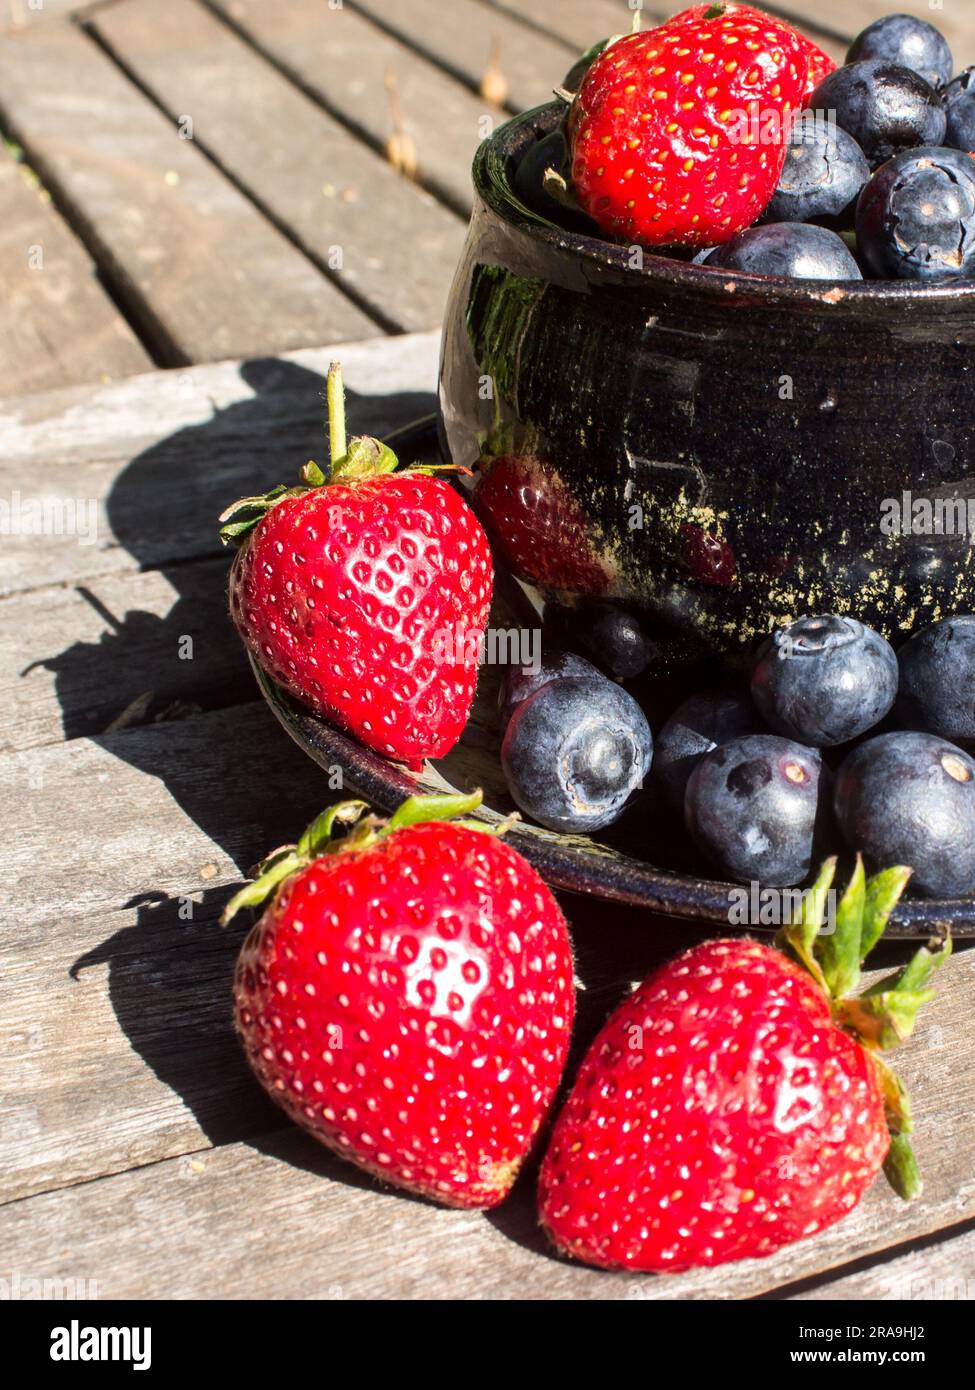 Overflowing abundance of Strawberries and Blueberries Stock Photo